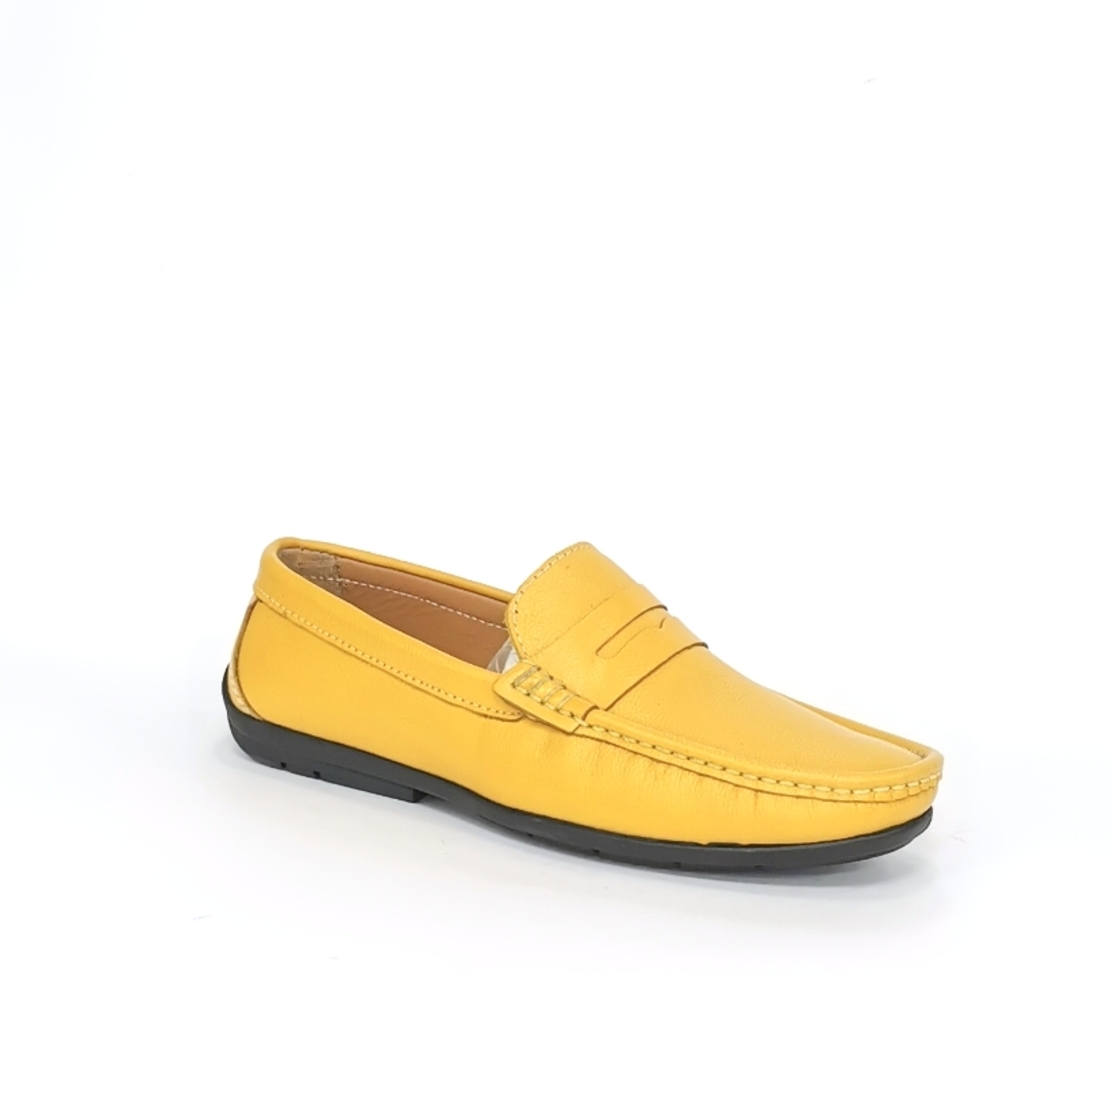 Мen's loafers made of natural leather in the color yellow/7456